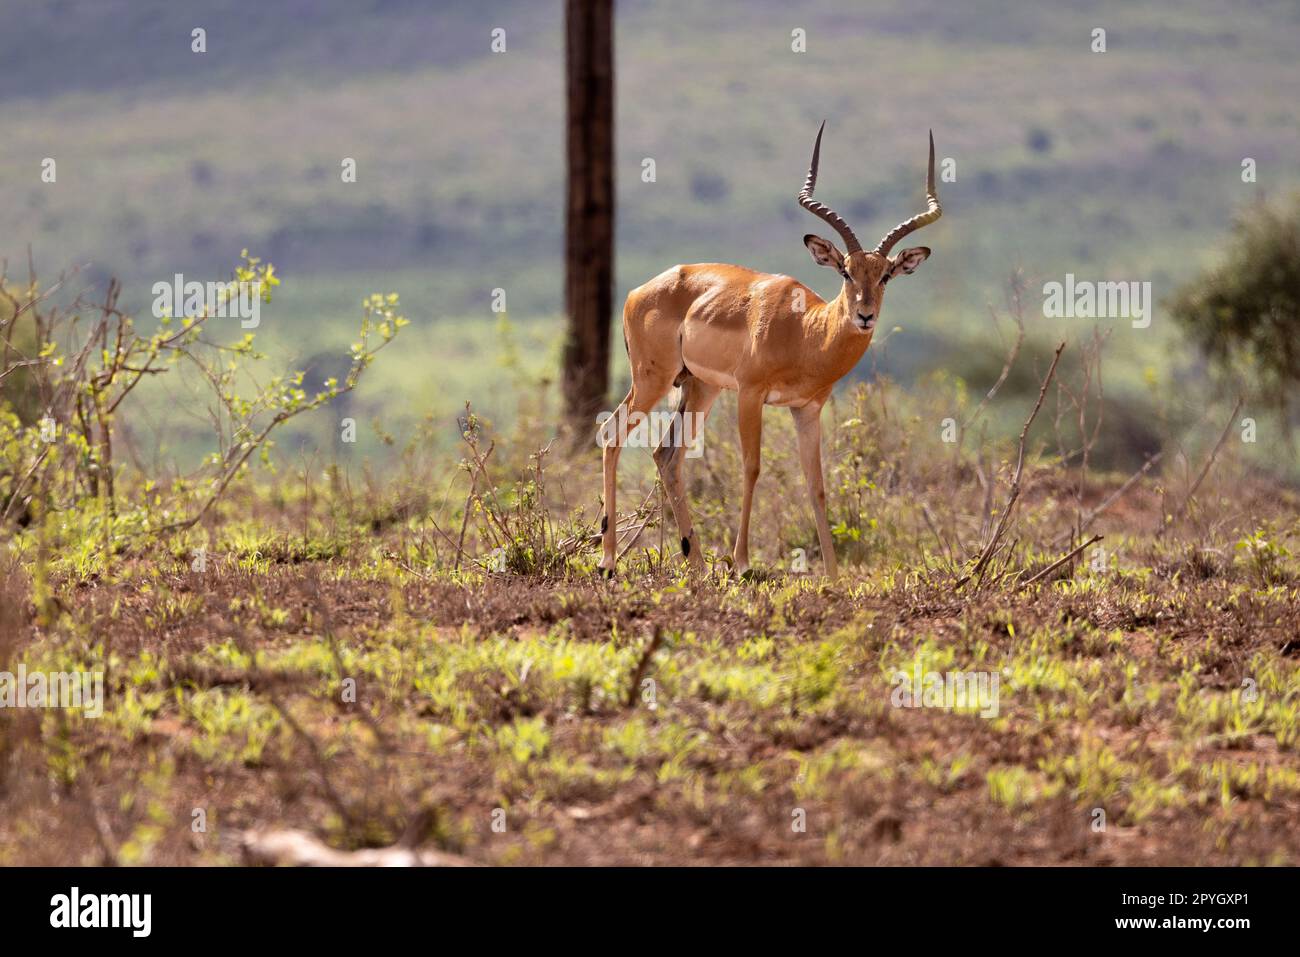 This photo captures the peaceful scene of an impala grazing on the golden savannah grasses of the Kenyan Tsavo East reserve. Its striking curved horns Stock Photo